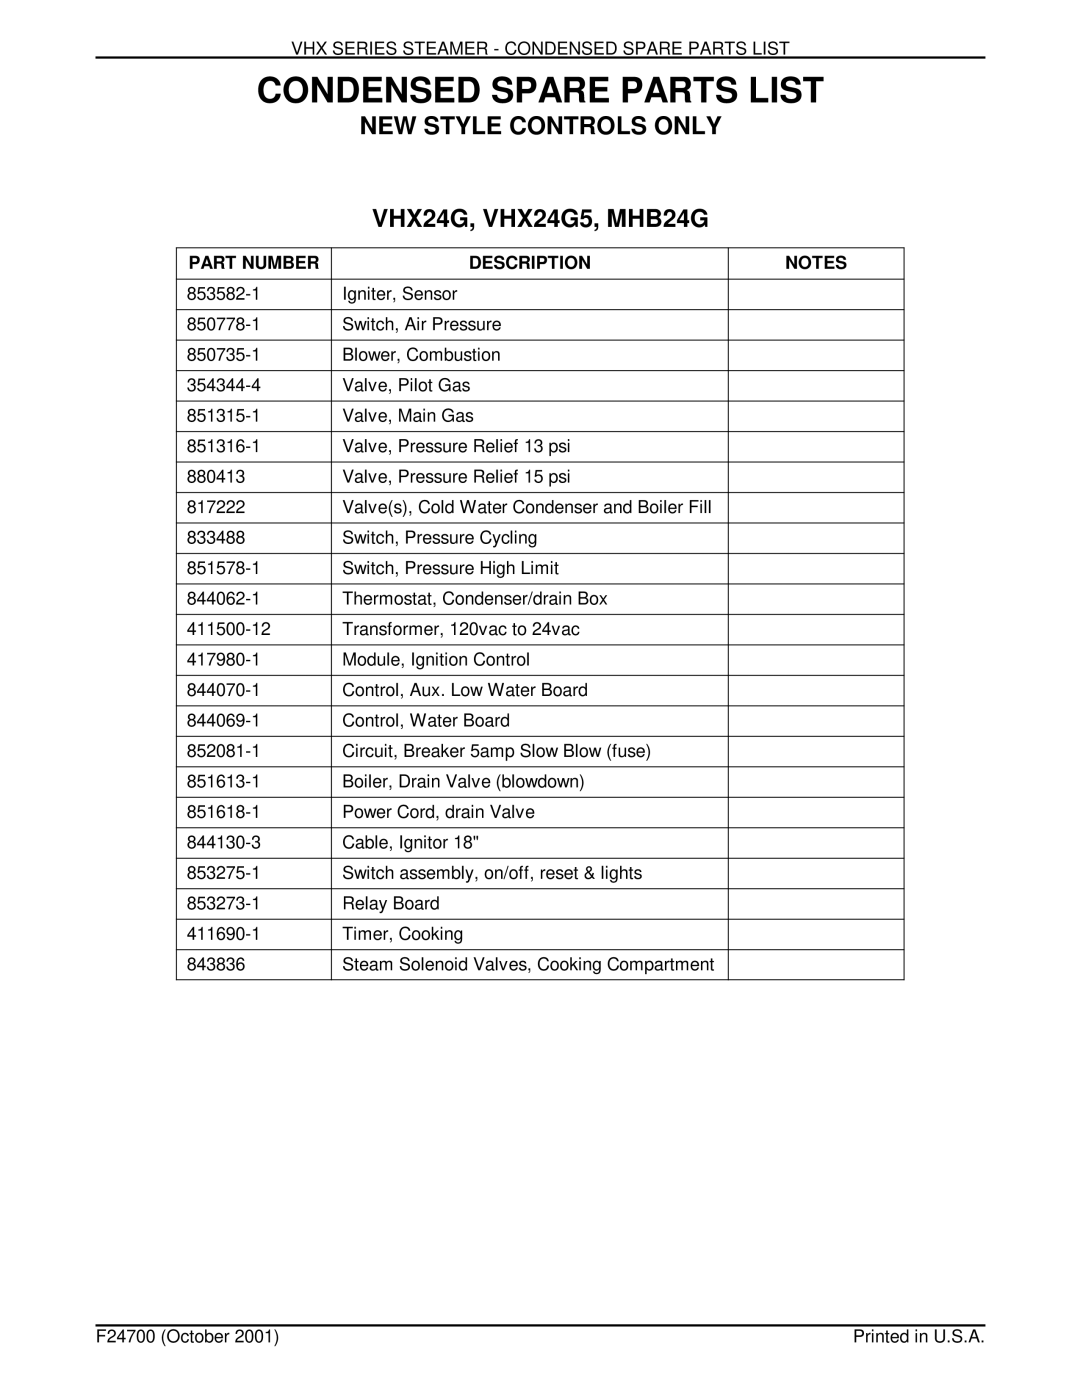 Vulcan-Hart manual Condensed Spare Parts List, NEW Style Controls only VHX24G, VHX24G5, MHB24G 